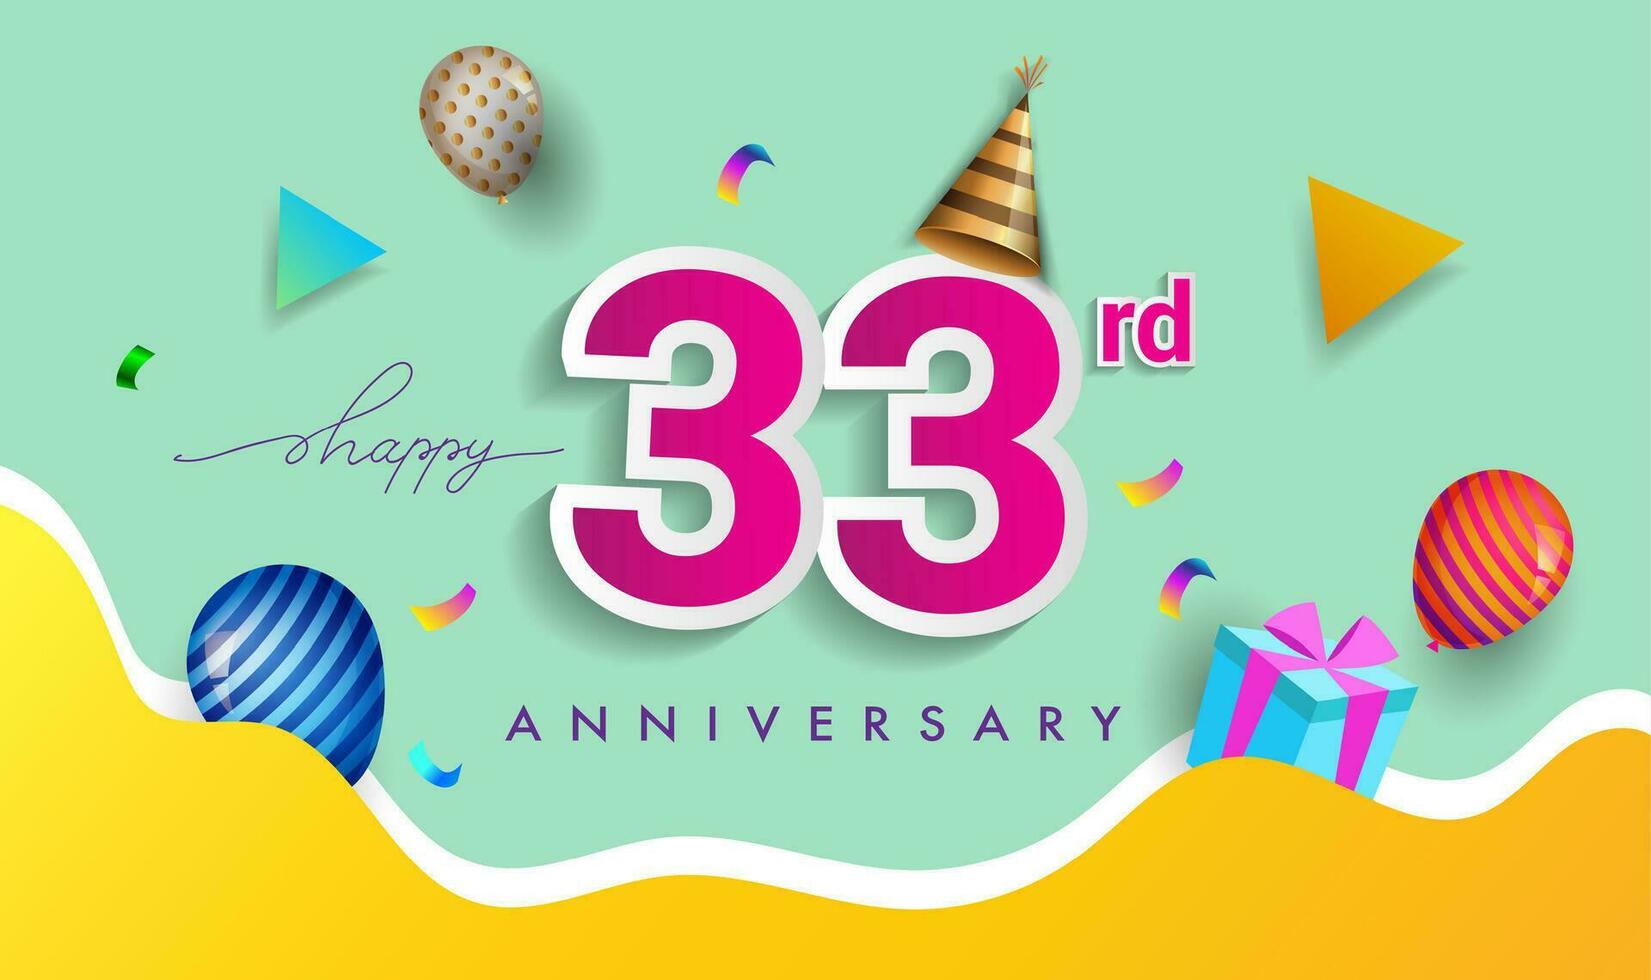 33rd Years Anniversary Celebration Design, with gift box and balloons, ribbon, Colorful Vector template elements for your birthday celebrating party.